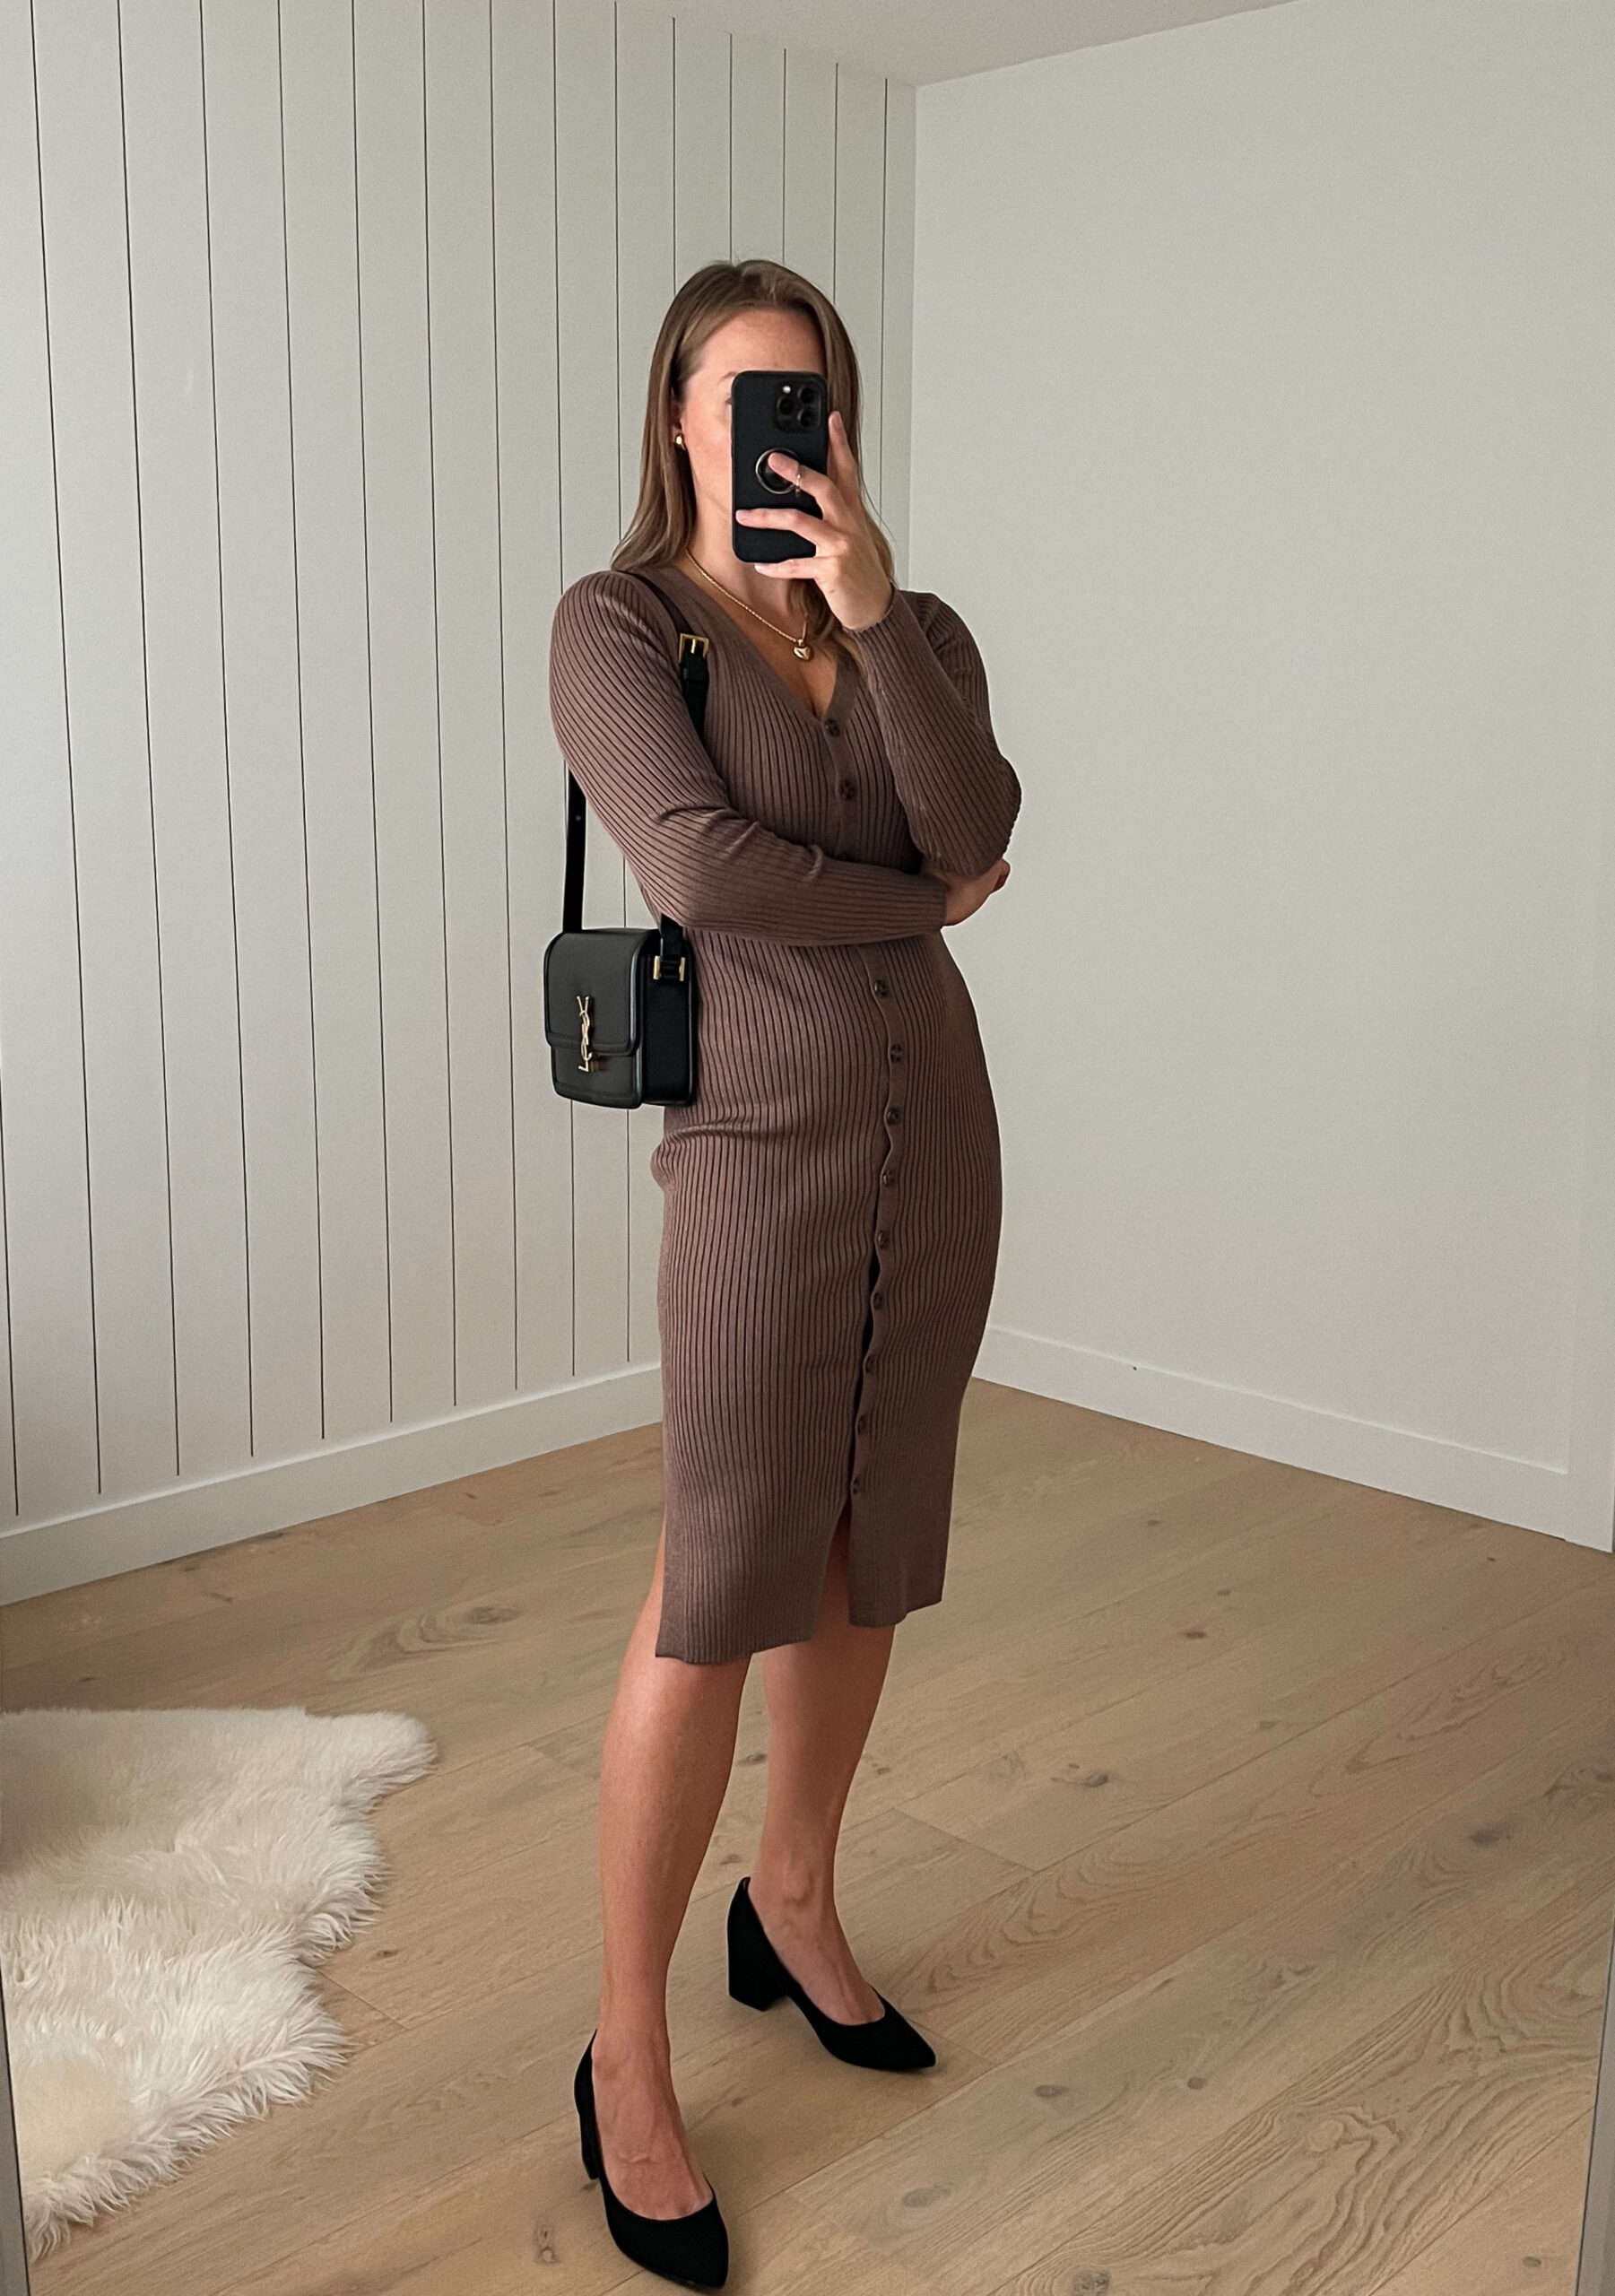 Woman wearing a brown knee length sweater dress with heels.